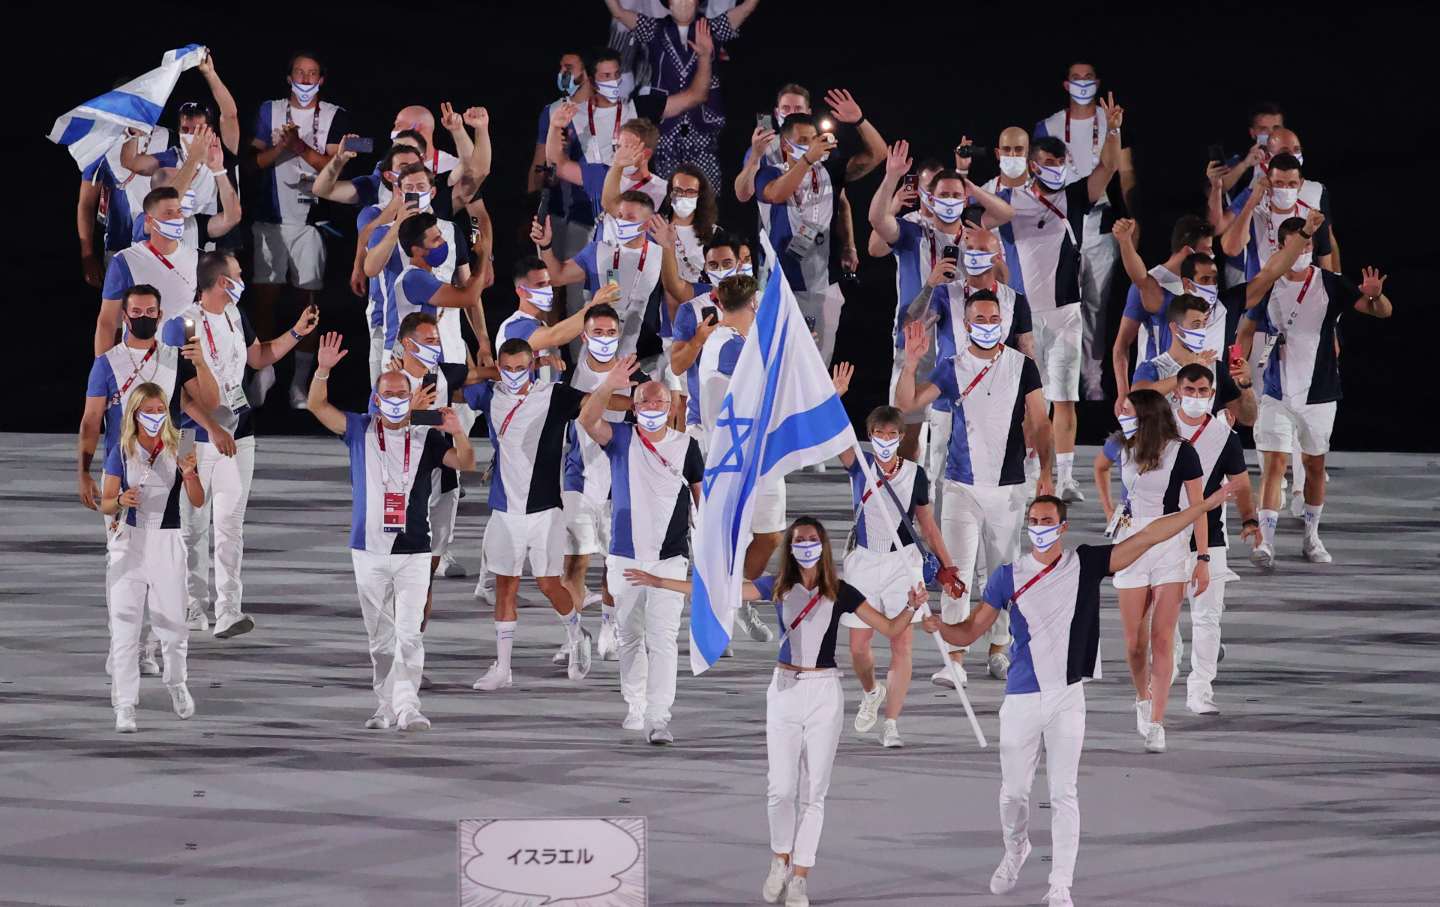 Should Israel’s Flag Be Raised at the Paris Olympics?